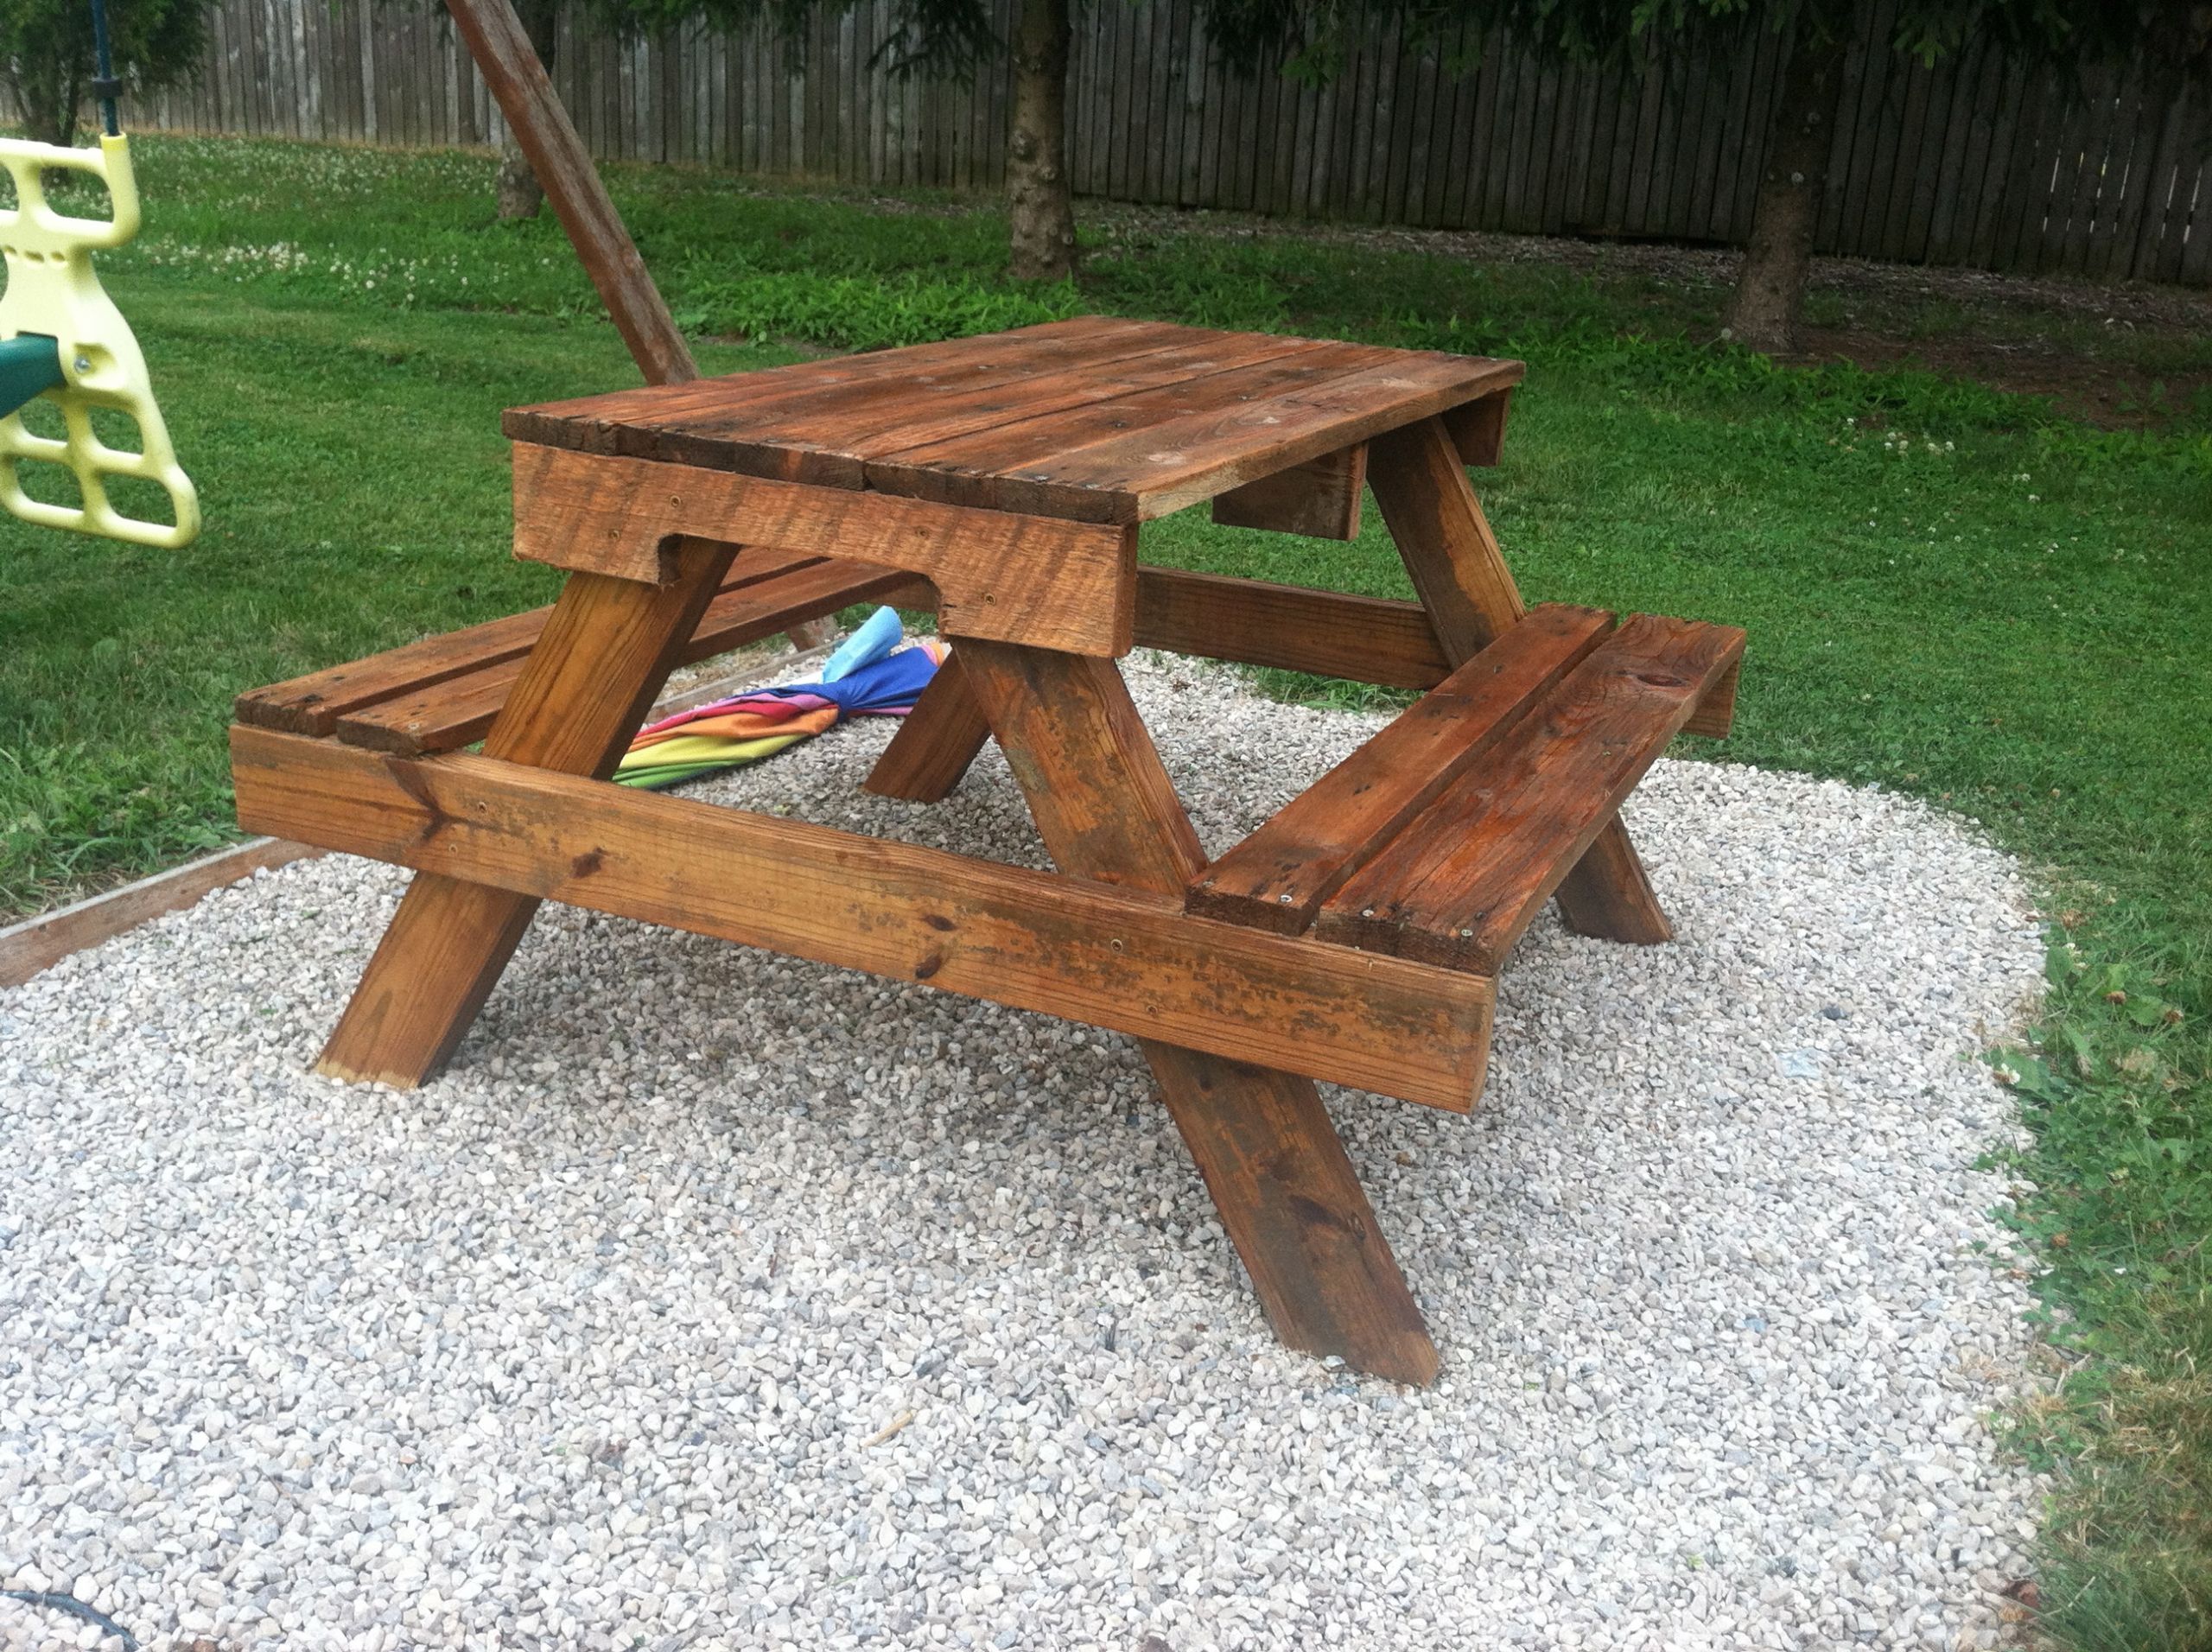 DIY Toddler Table
 DIY Kids Picnic Table from Pallet Wood